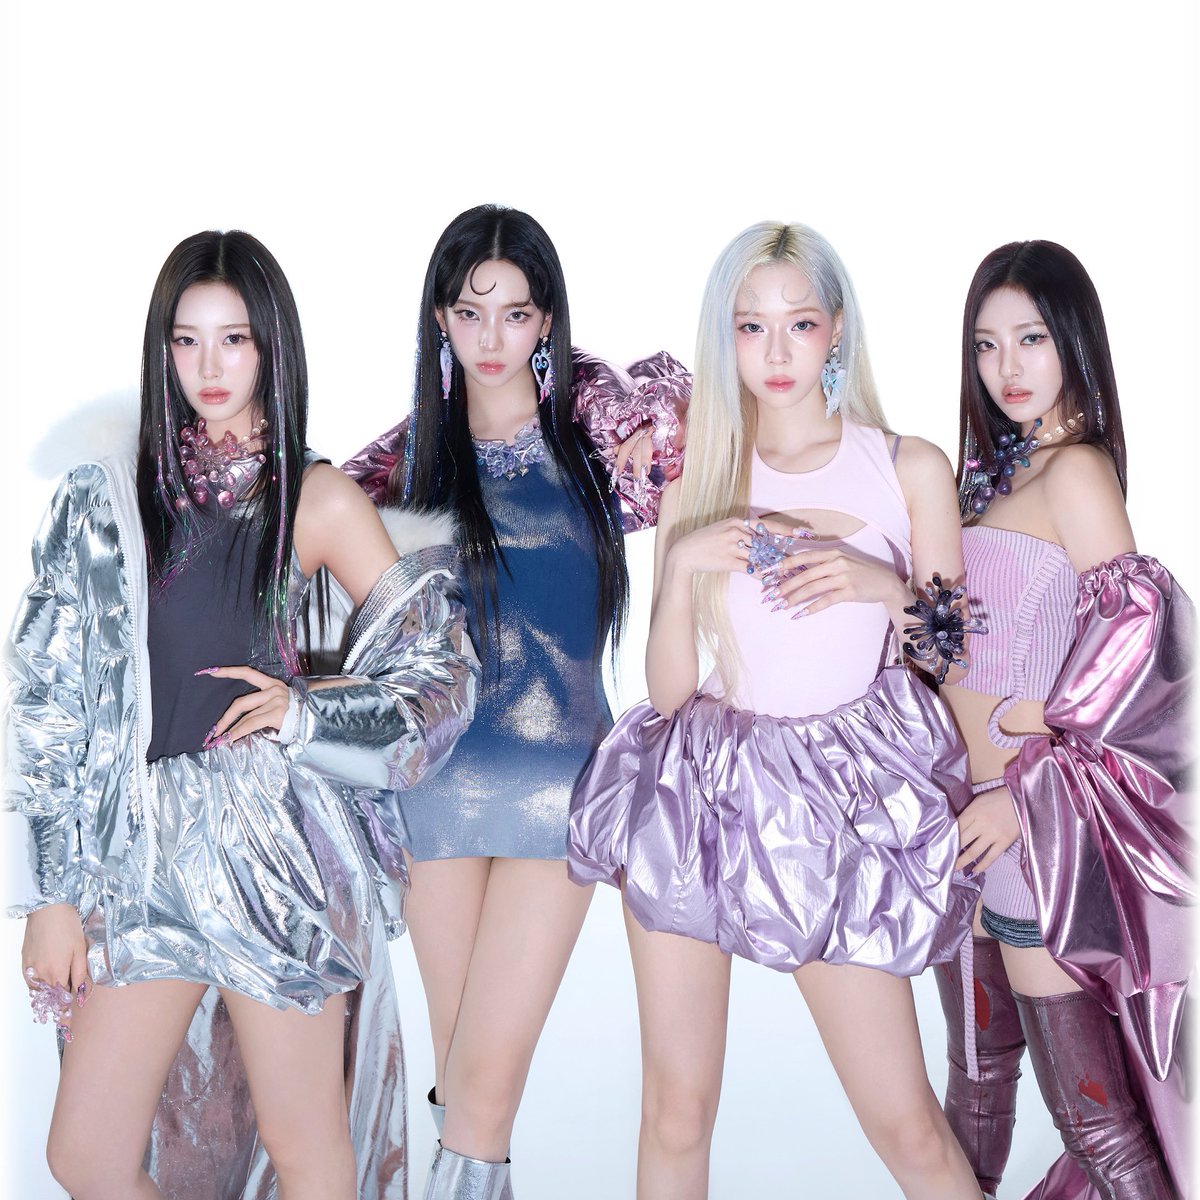 .@aespa_official now holds the entire Top 10 of highest streaming days for SM Entertainment’s songs on the Spotify Global Chart:

1. “Supernova” — 2,034,749 🆕
2. “Drama” — 1,607,616
3. “Drama” — 1,590,780
4. “Drama” — 1,571,562 
5. “Drama” — 1,551,217